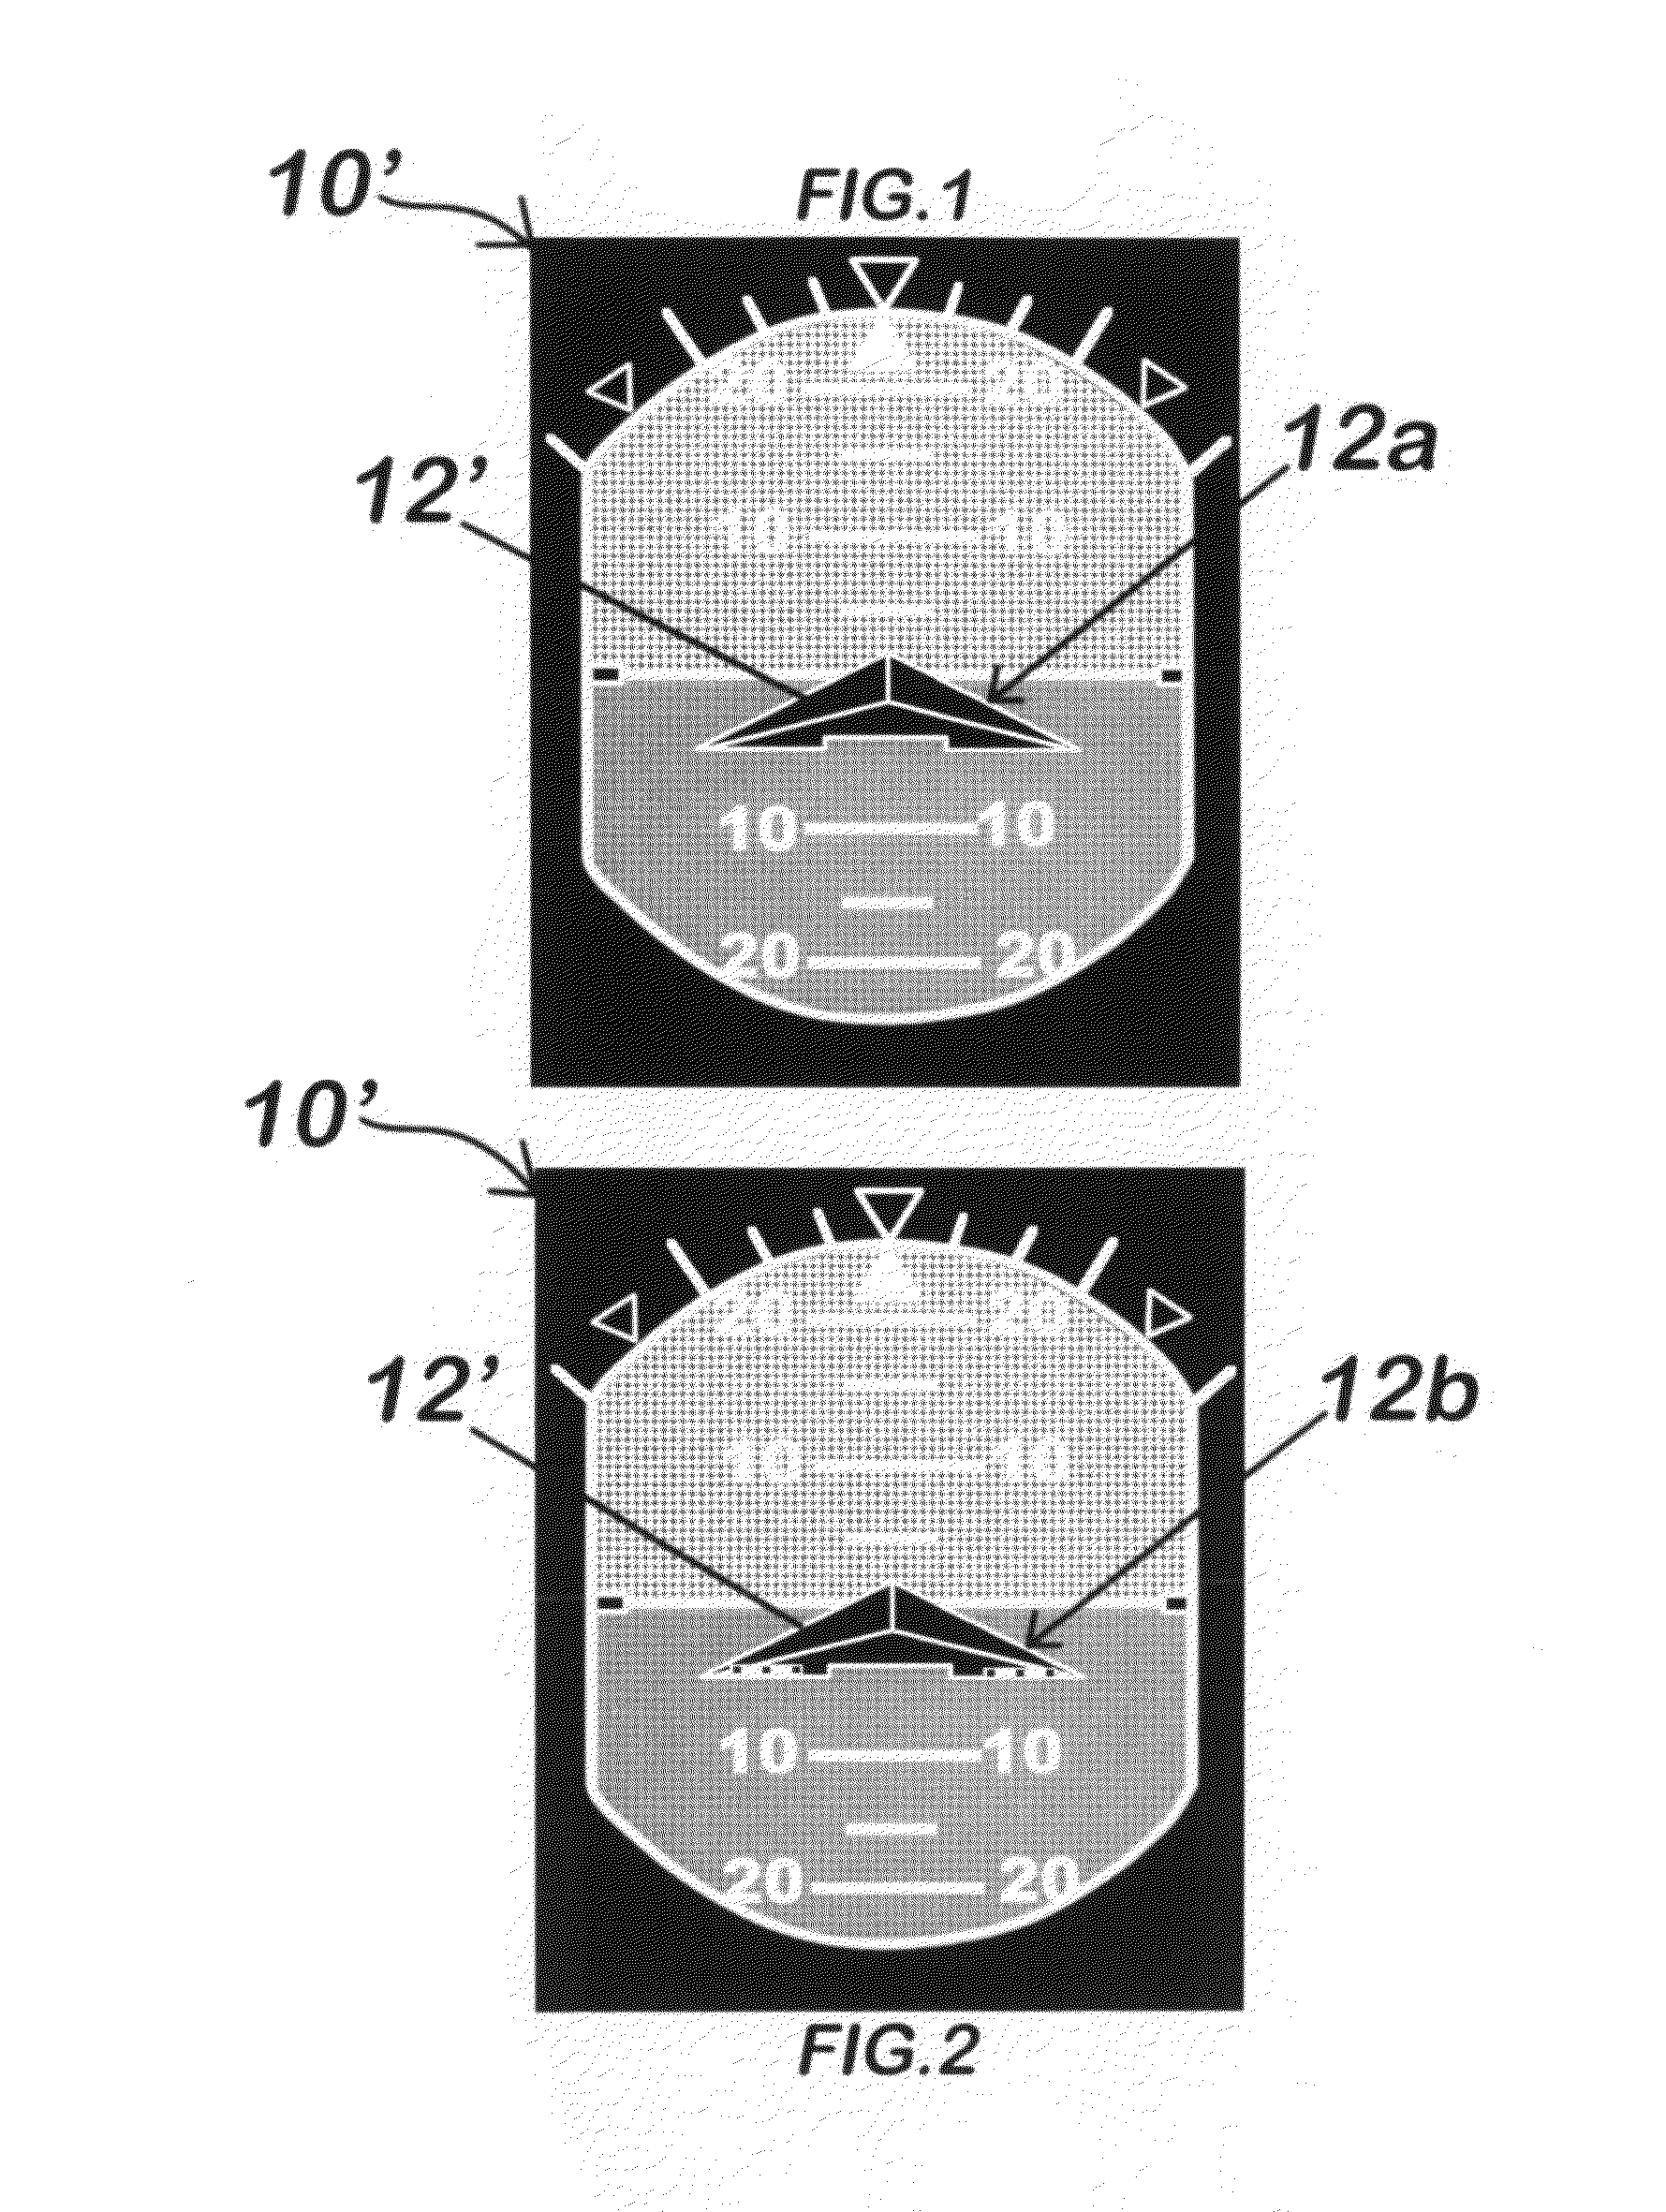 Attitude and configuration indicator display system and method